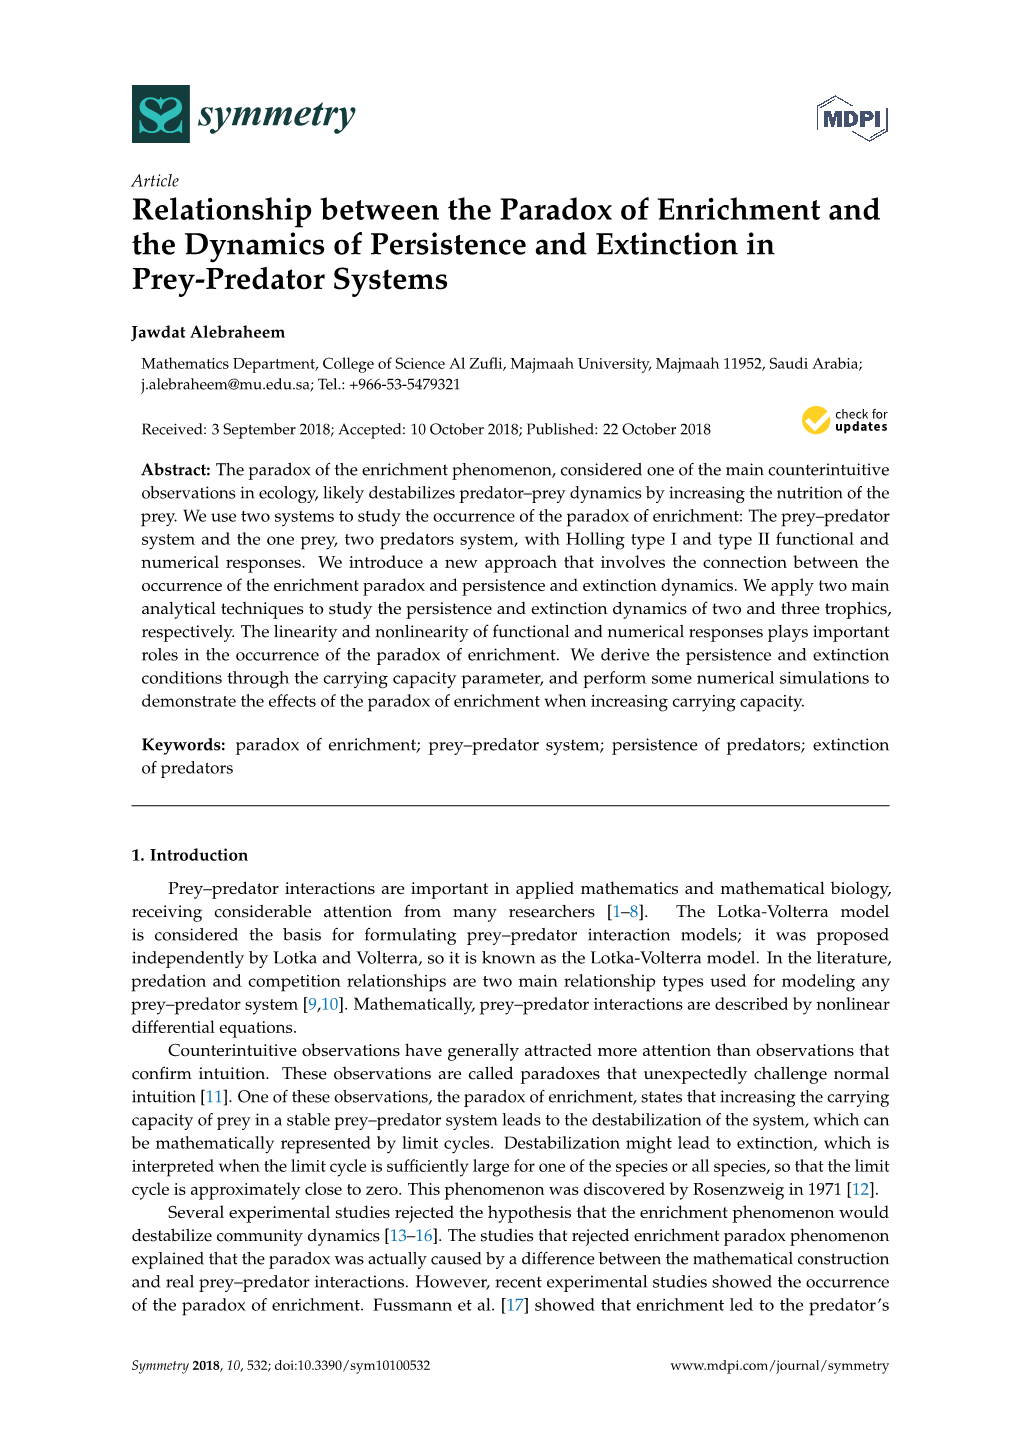 Relationship Between the Paradox of Enrichment and the Dynamics of Persistence and Extinction in Prey-Predator Systems